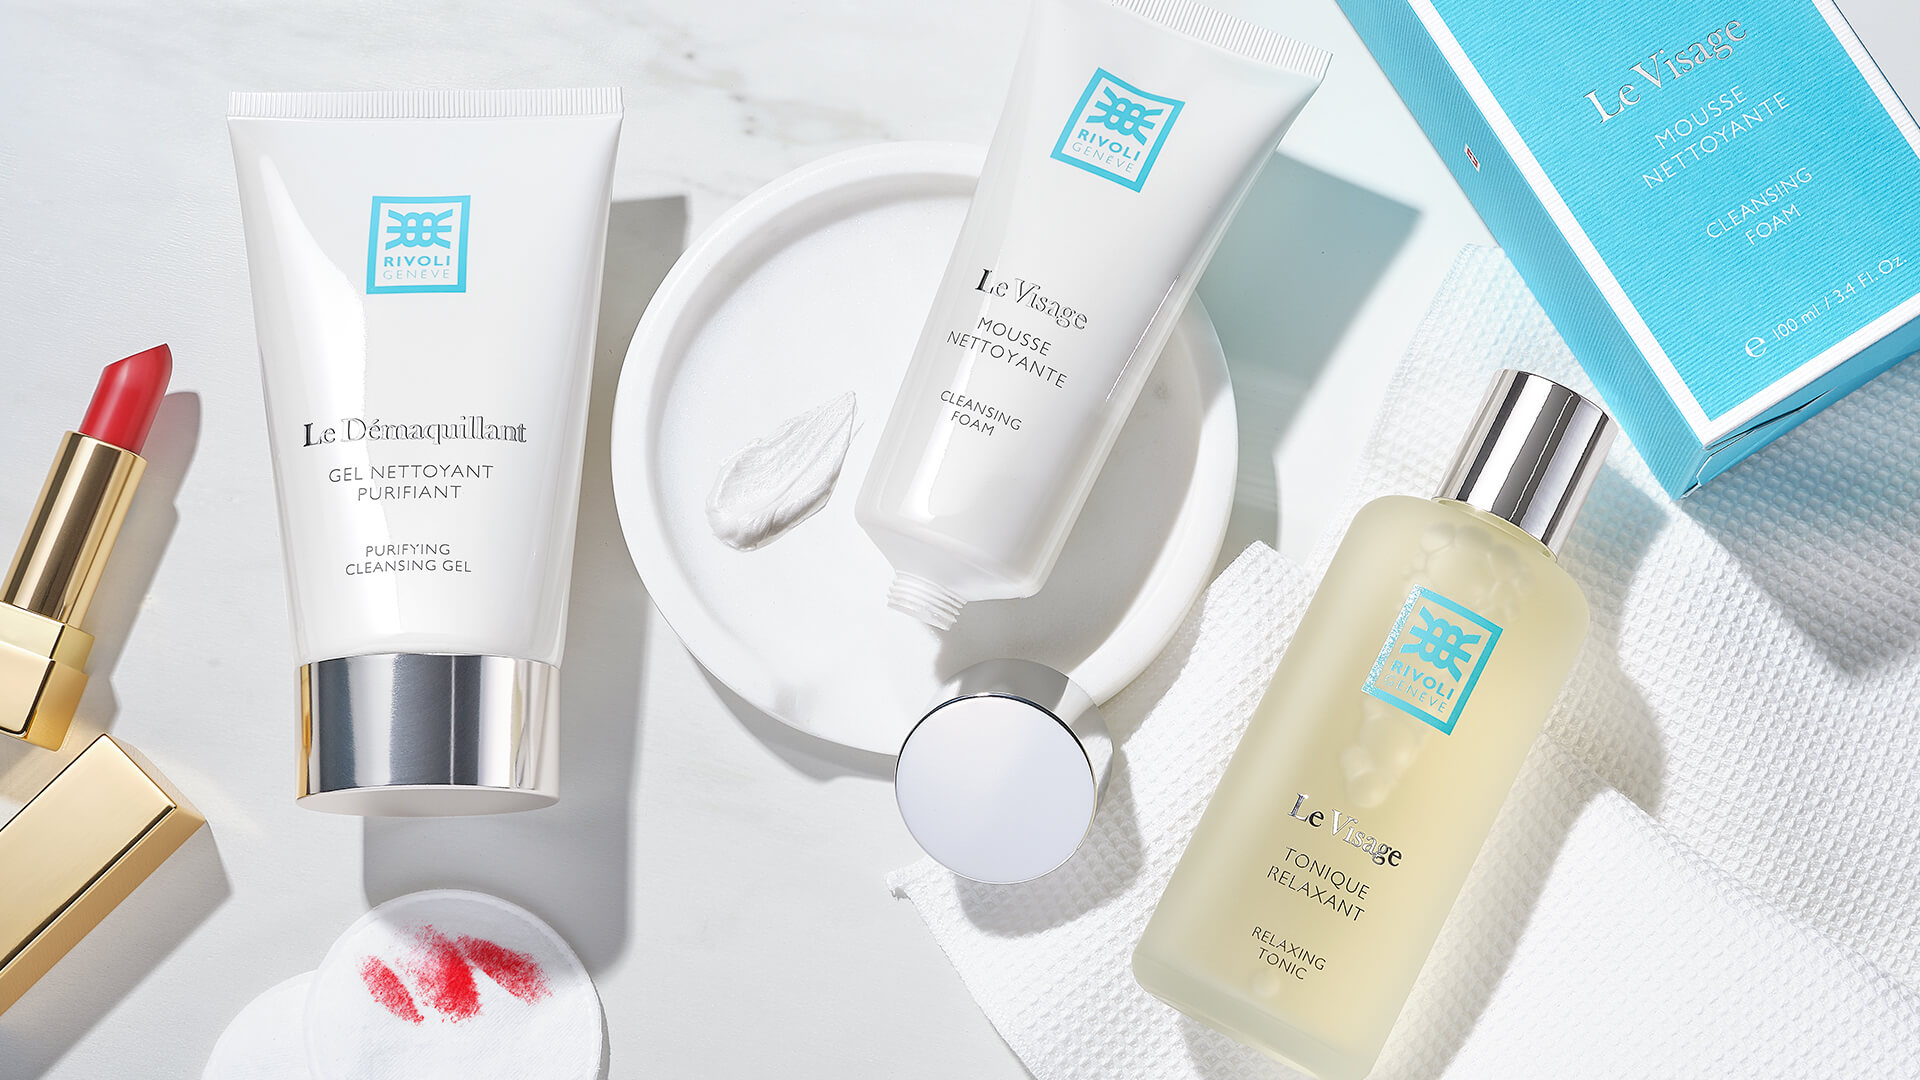 Double cleansing: the best start for an optimized skincare routine.